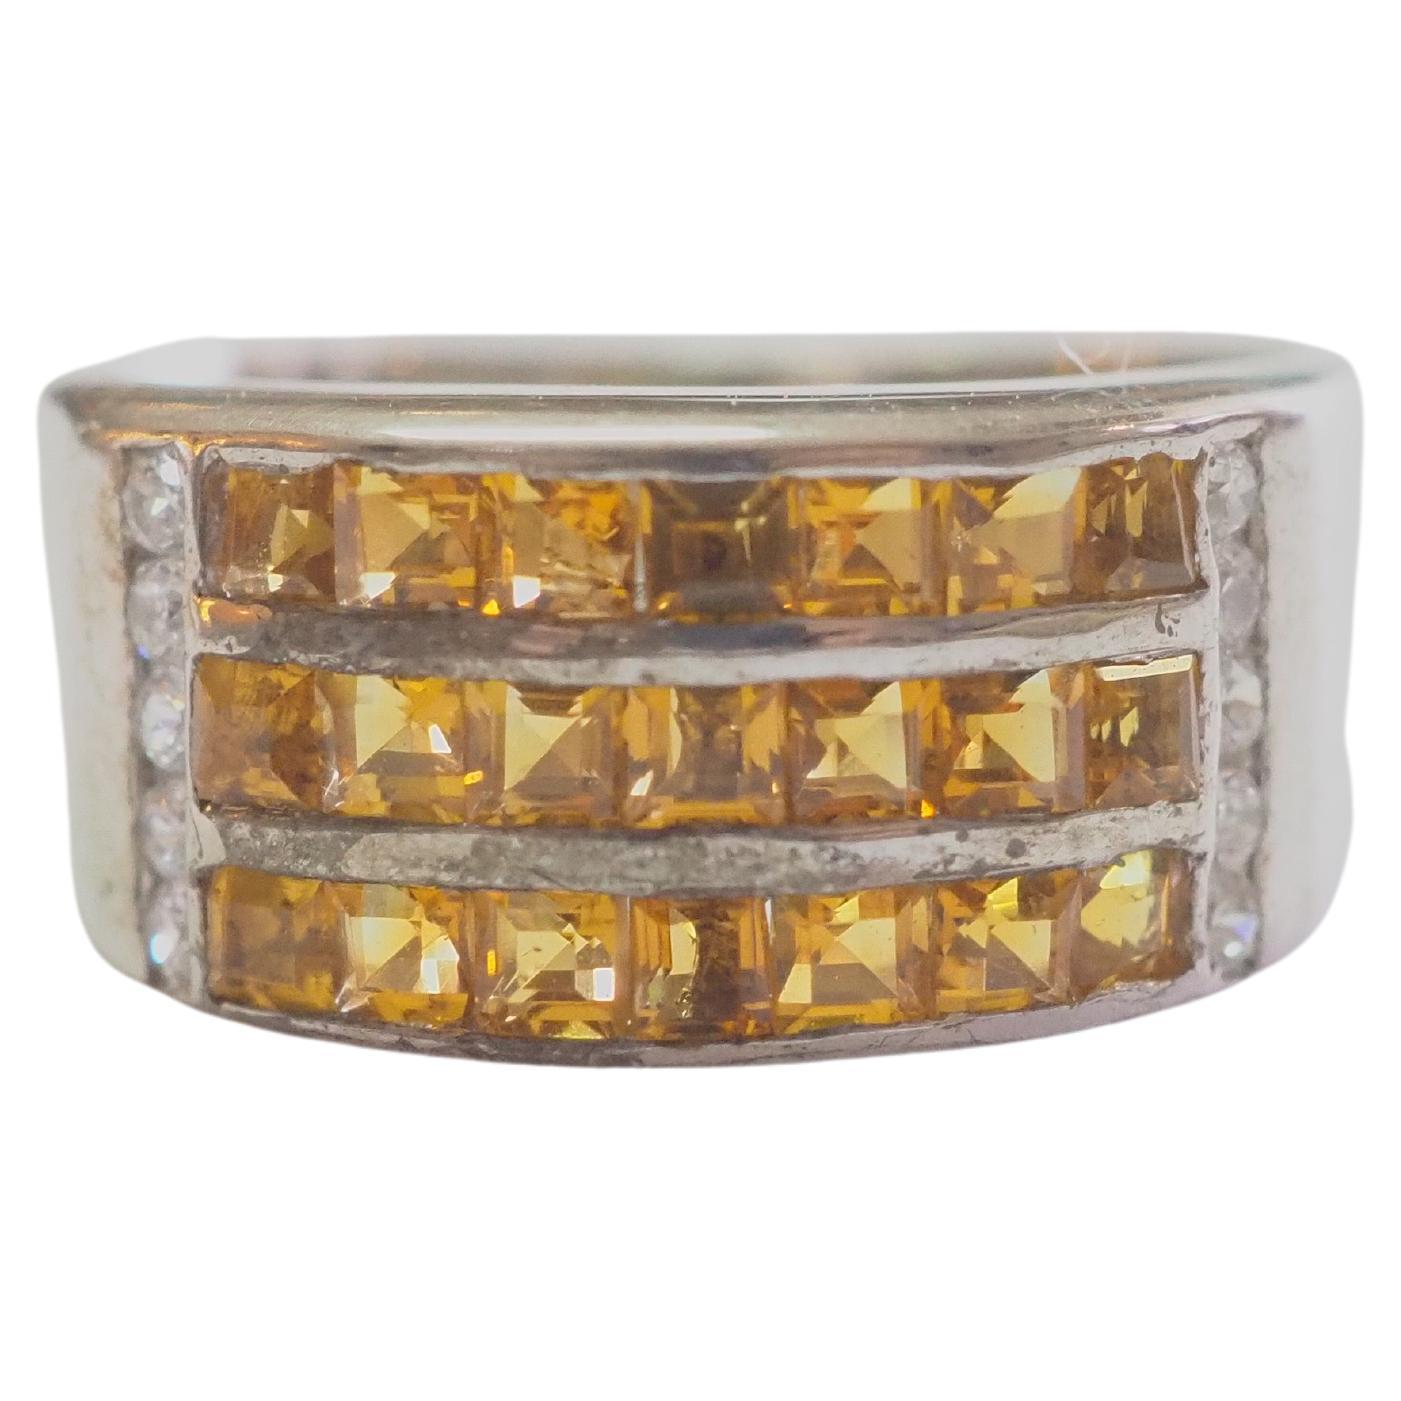 No Reserve- 3 Row 1.10ct Citrine & CZ Band Sterling Silver Ring